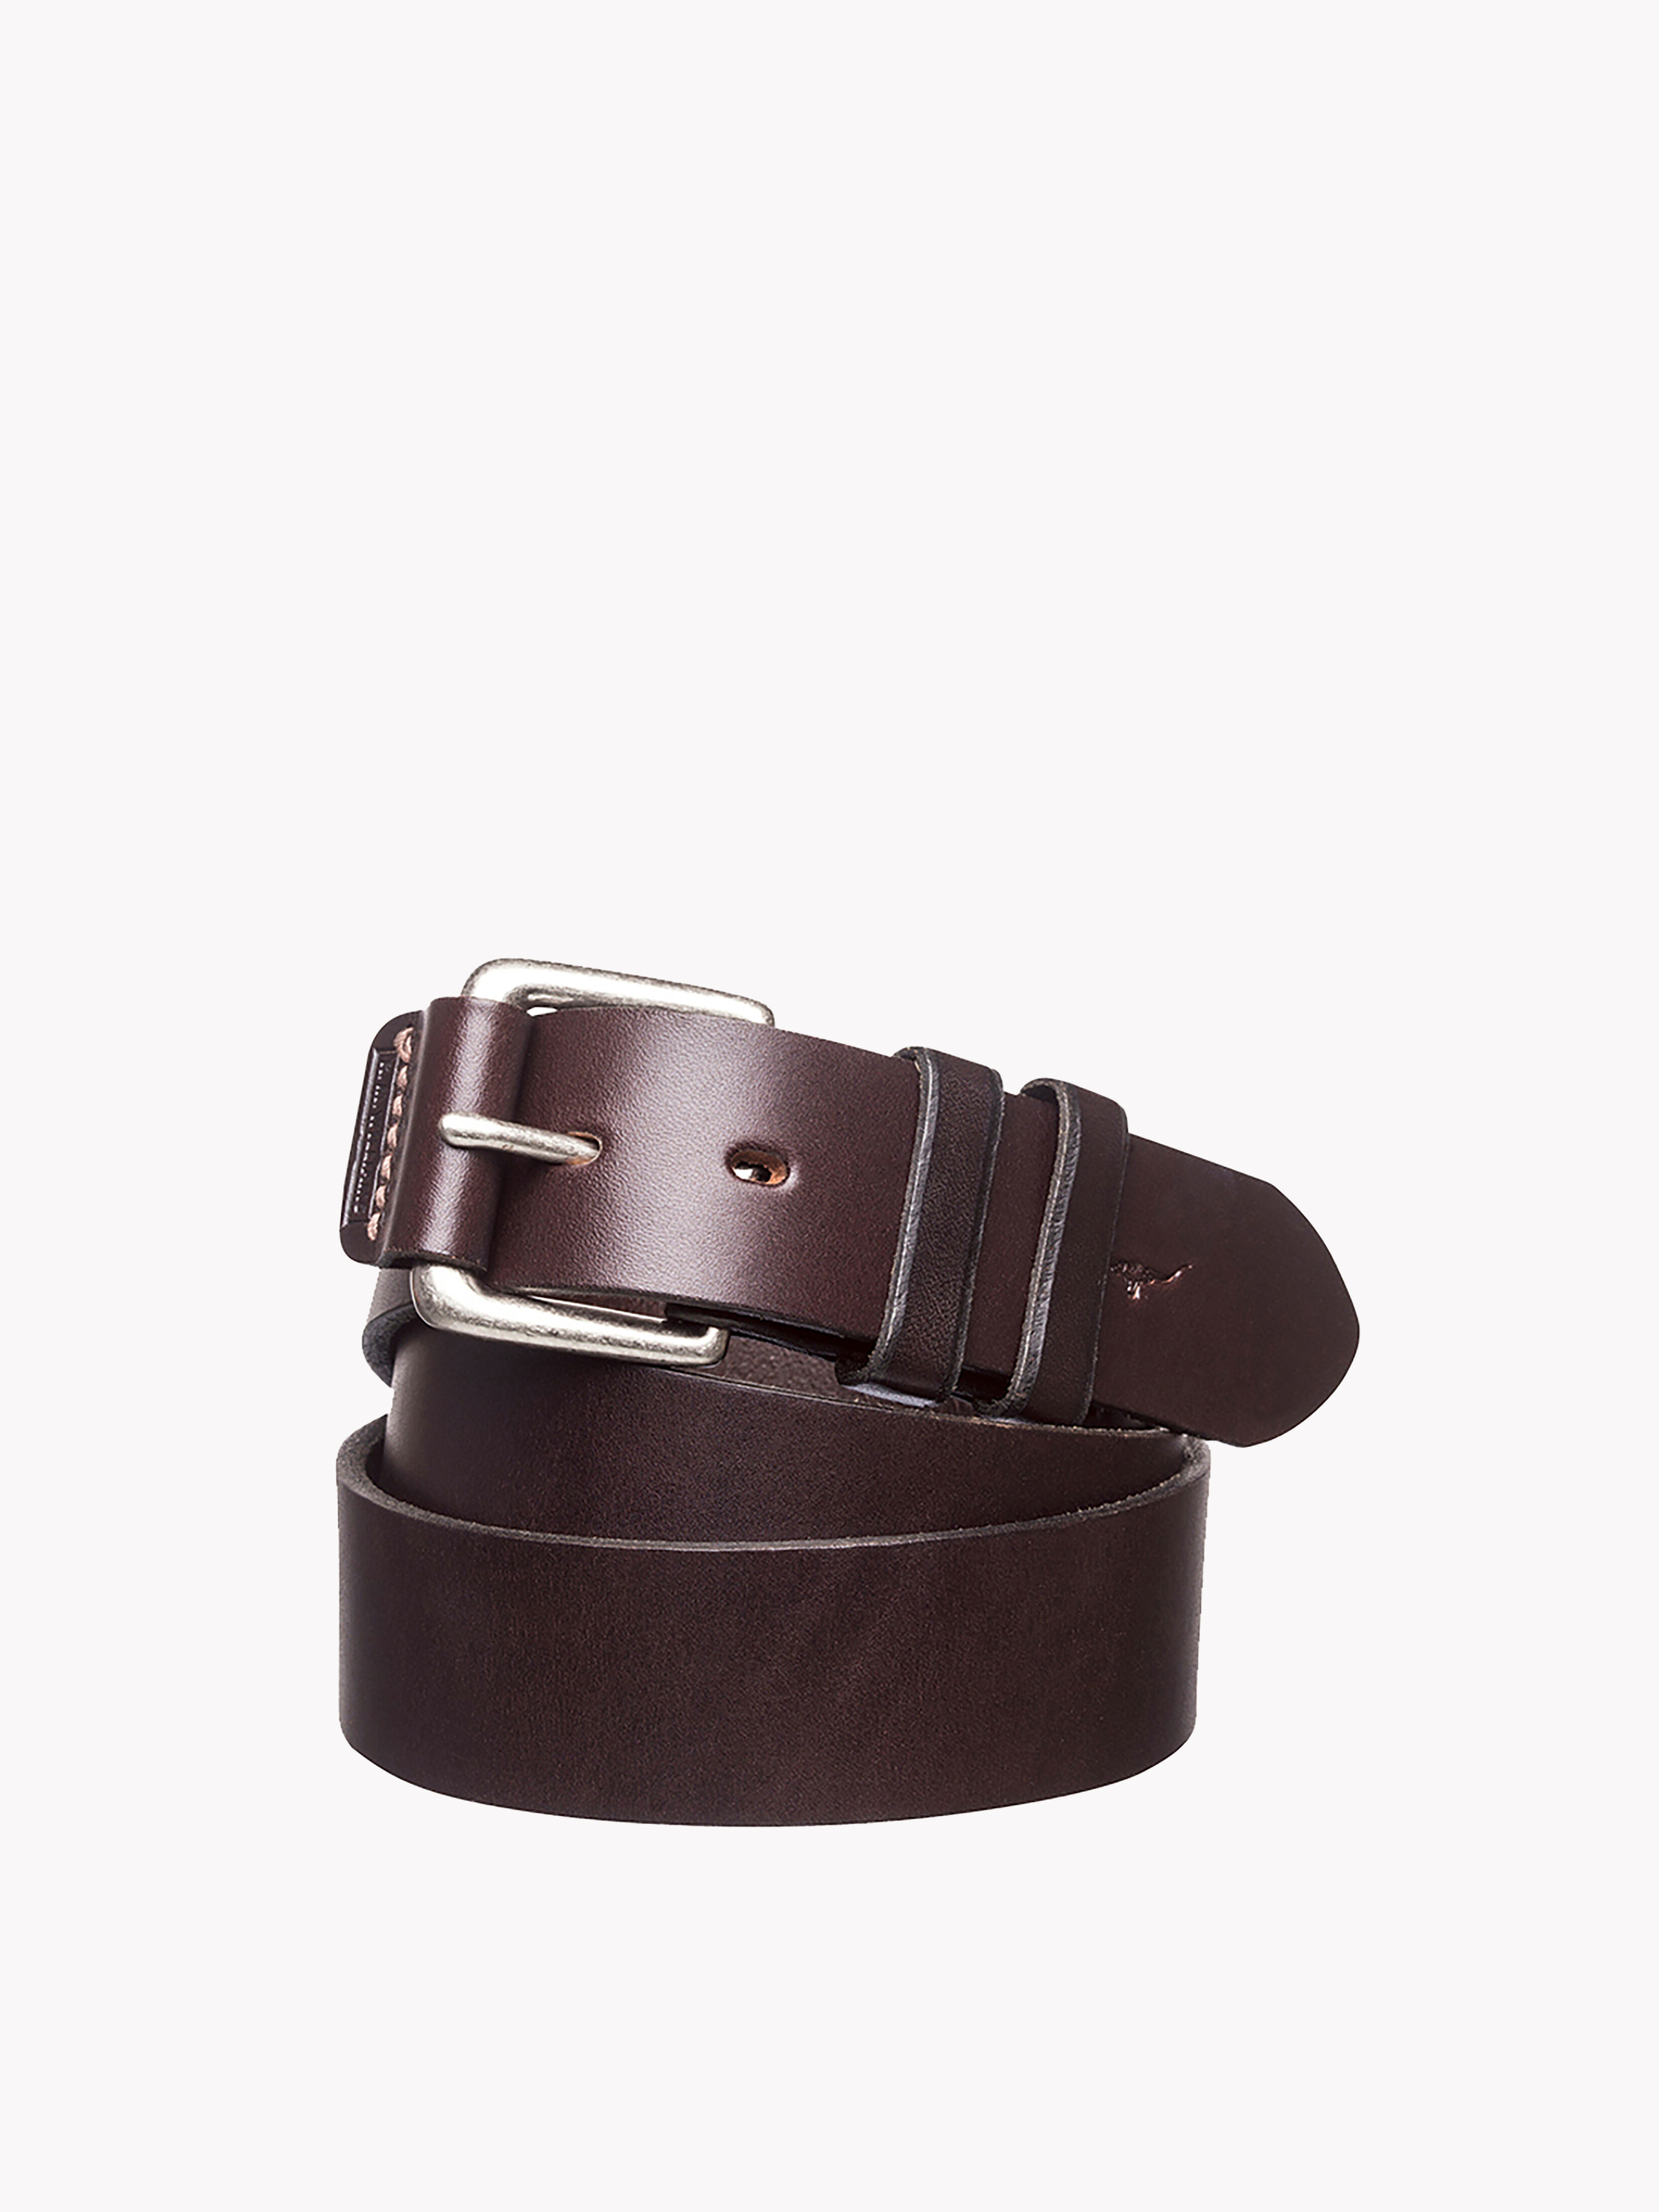 Men's Leather Belts. Covered Buckle 